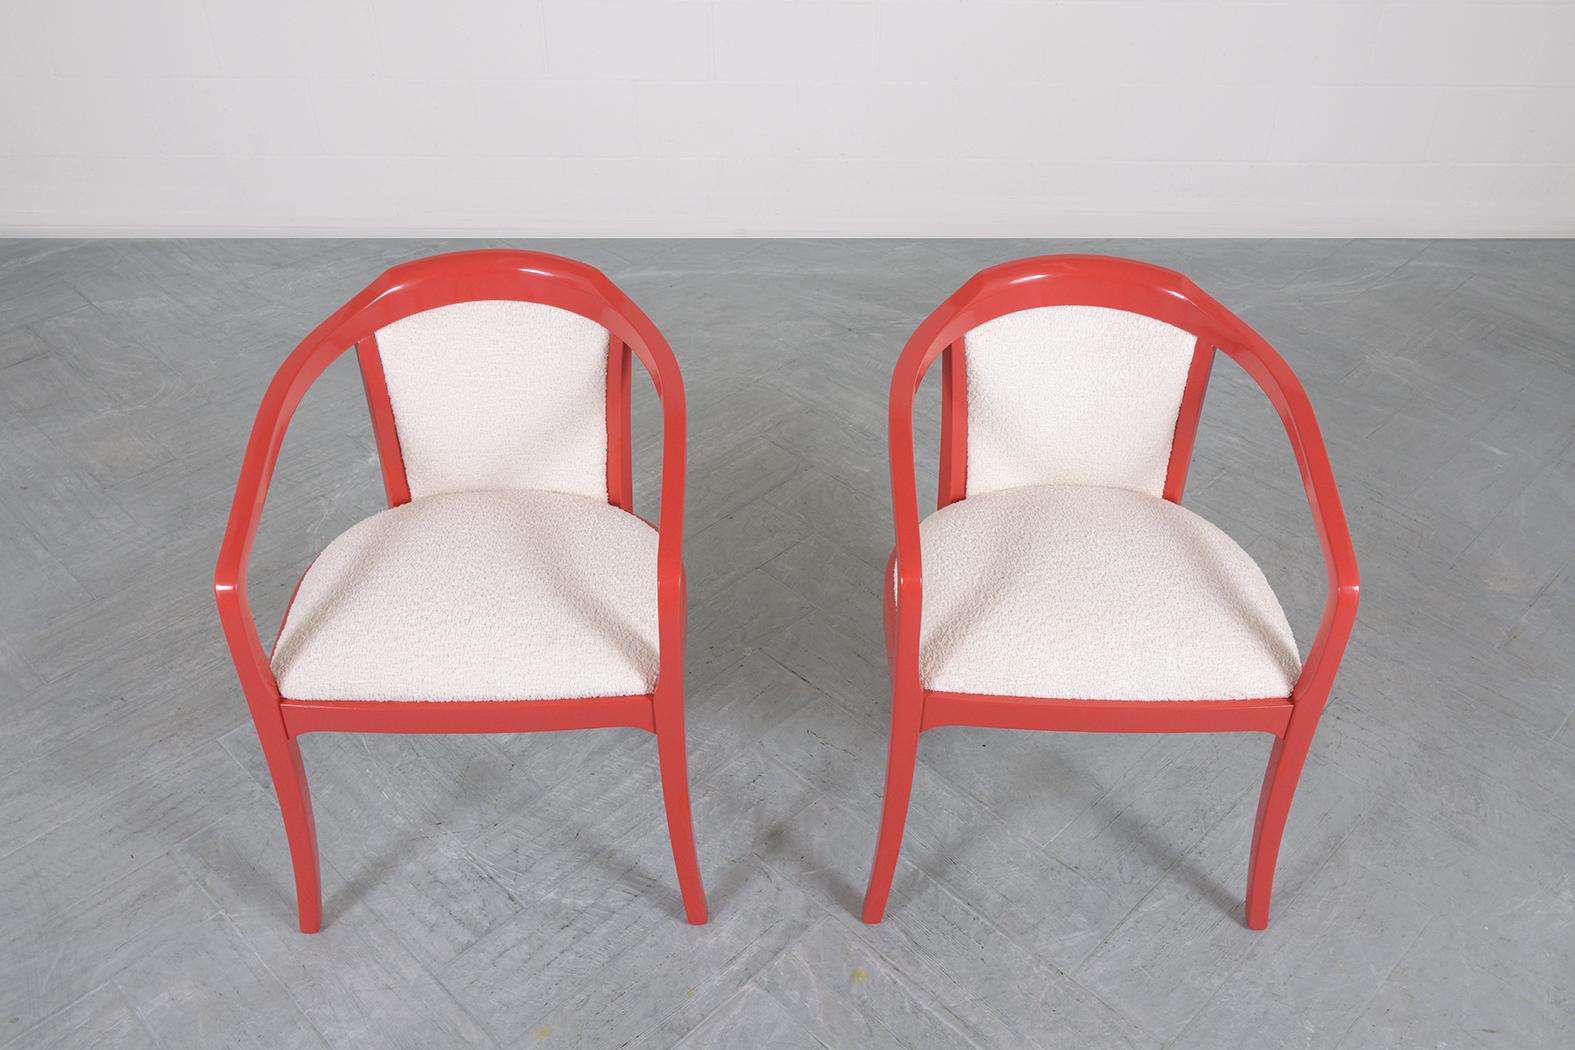 Step back into the 1970s with our captivating pair of mid-century modern armchairs, expertly restored and hand-crafted from wood by our in-house team of specialists. Each chair boasts a sophisticated design accentuated by a carved frame and